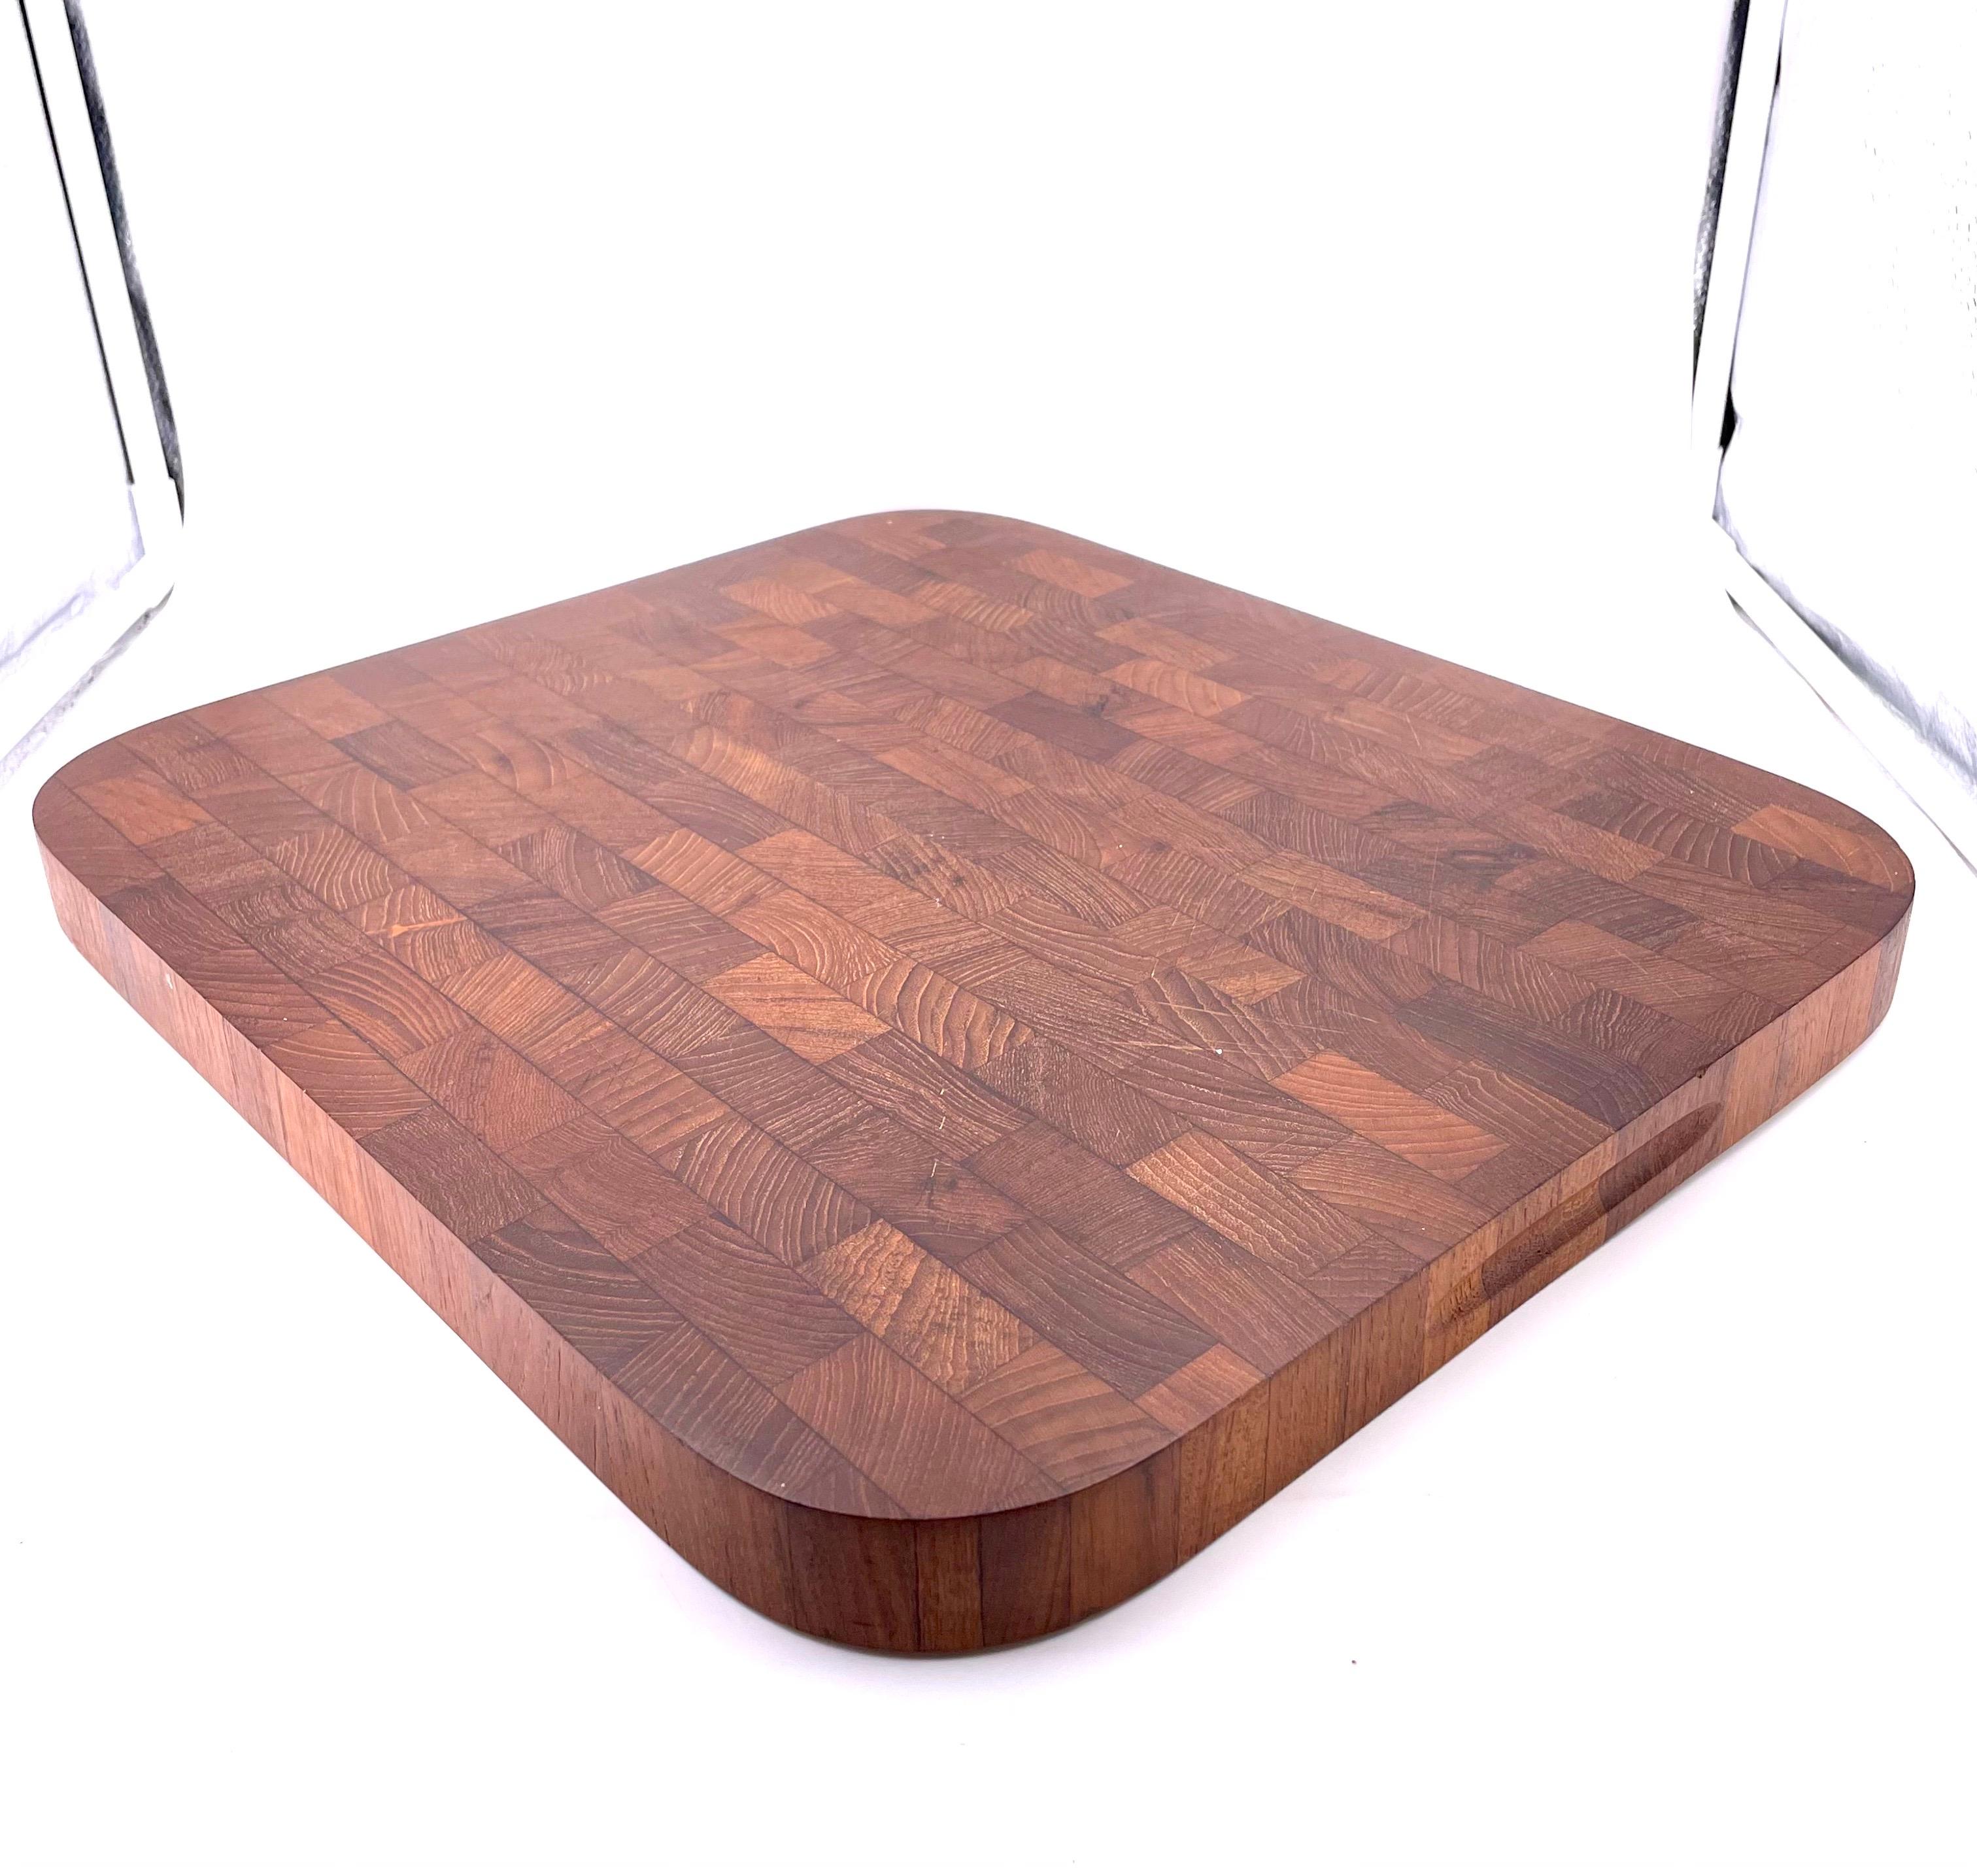 brown chopping board used for